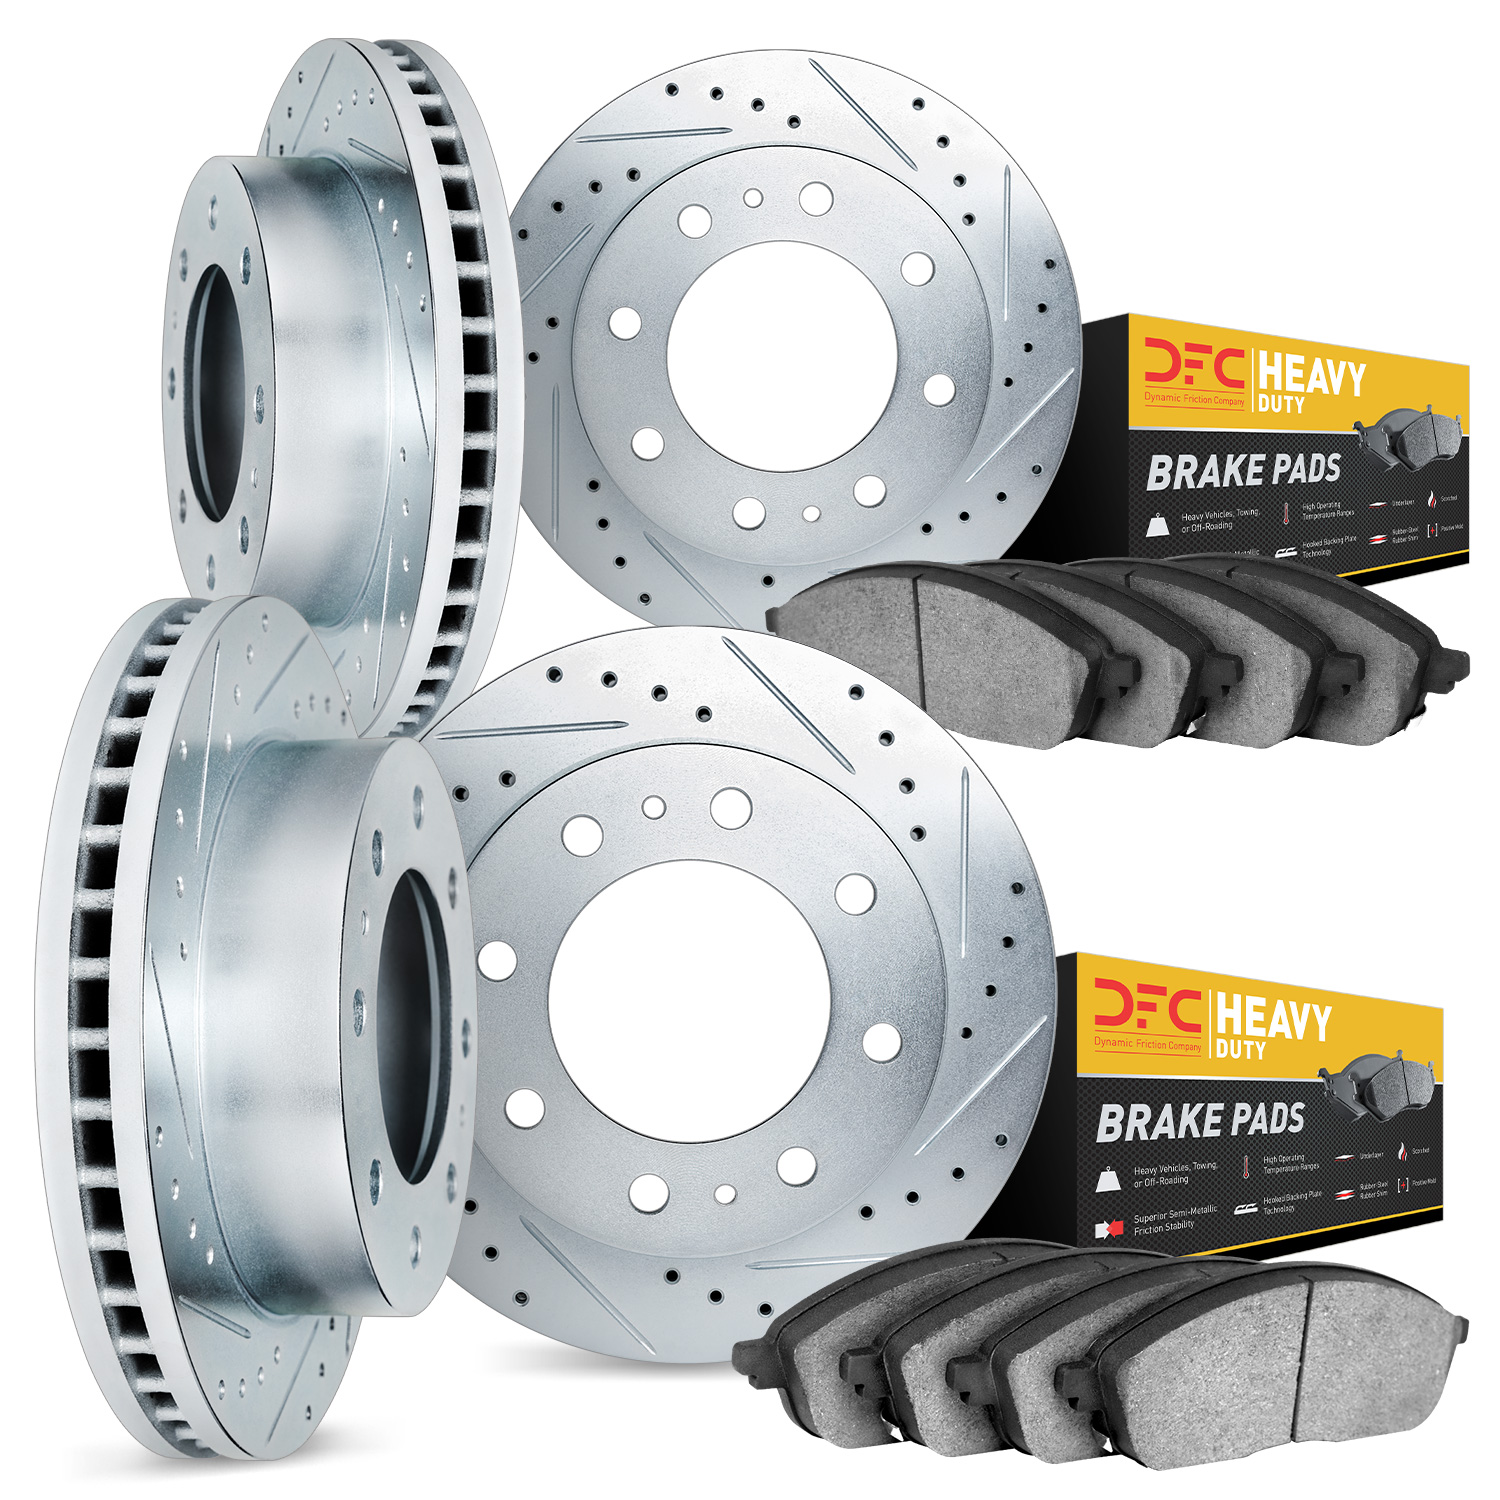 7204-48130 Drilled/Slotted Rotors w/Heavy-Duty Brake Pads Kit [Silver], 1999-2009 GM, Position: Front and Rear